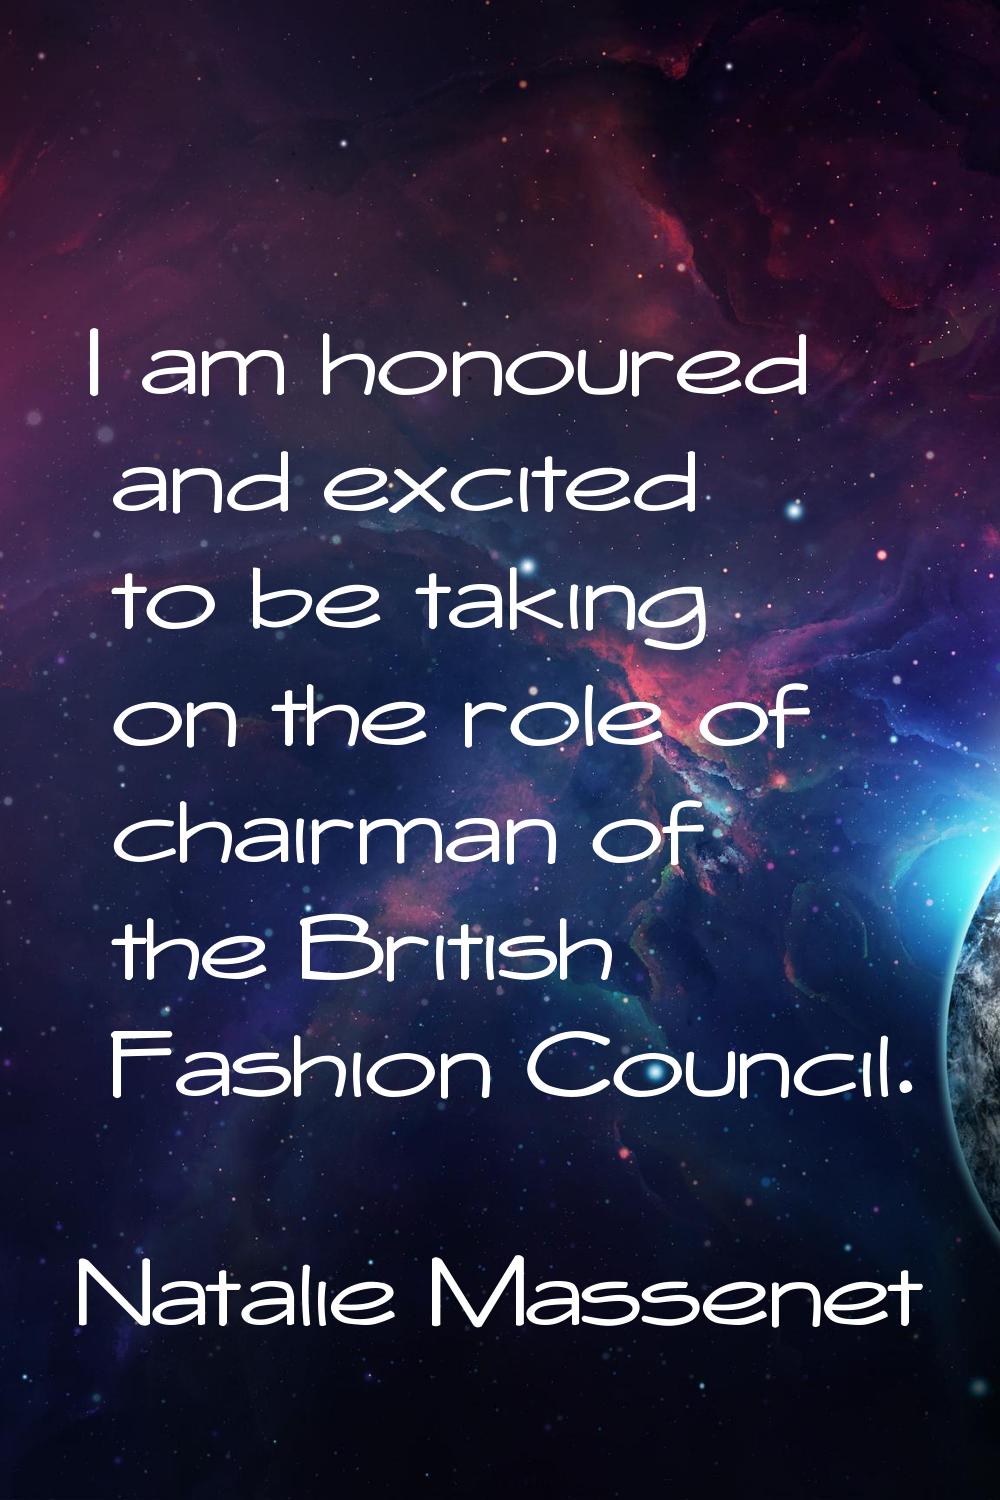 I am honoured and excited to be taking on the role of chairman of the British Fashion Council.